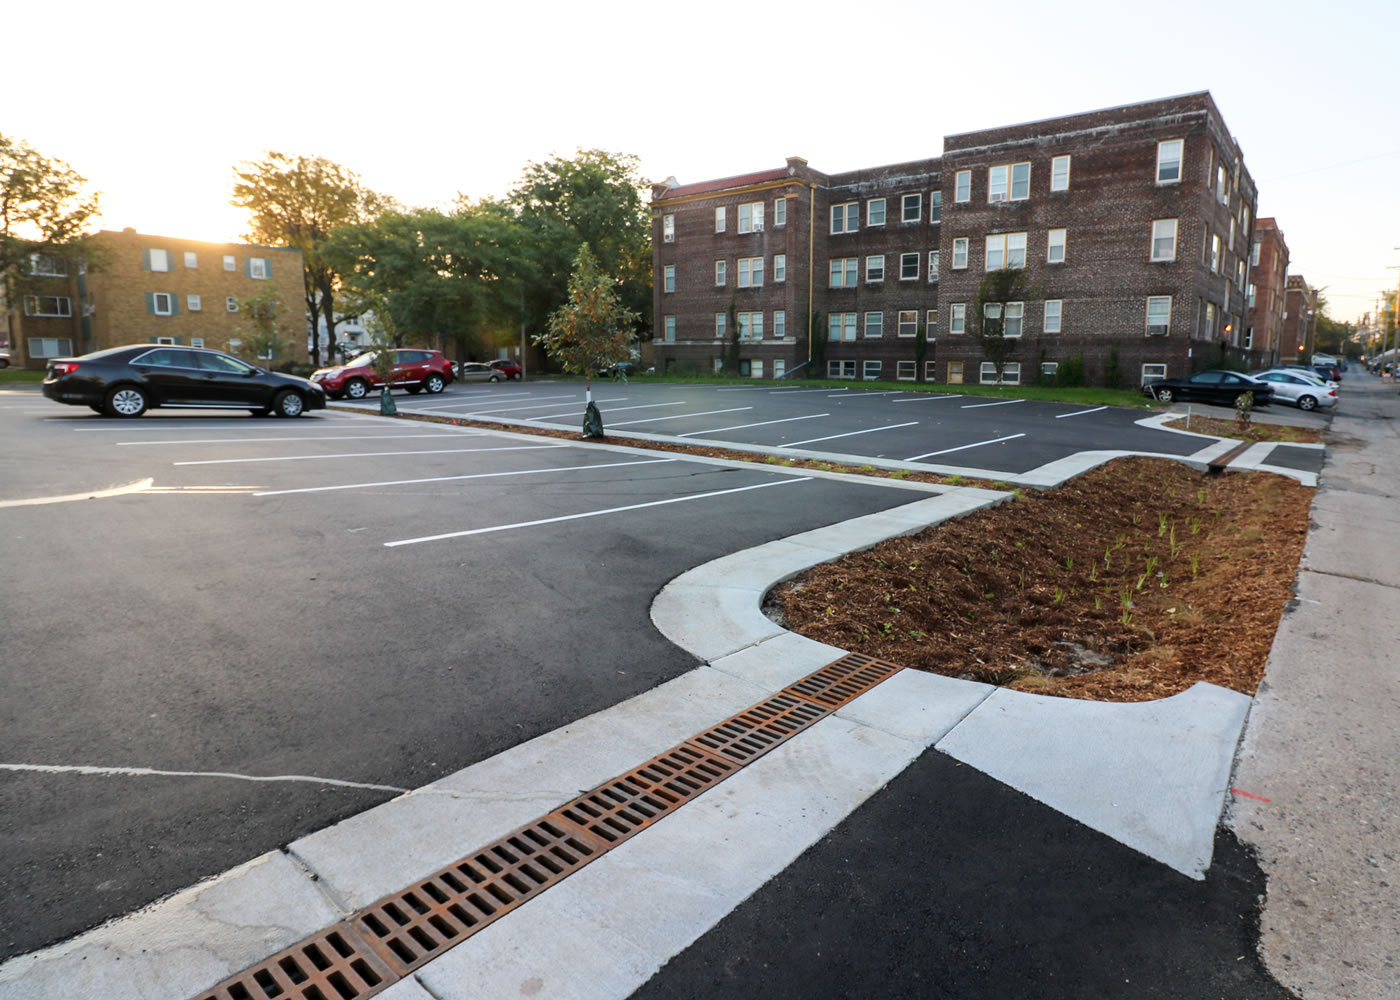 An "after" photo of the parking lot taken Oct. 11, 2016.